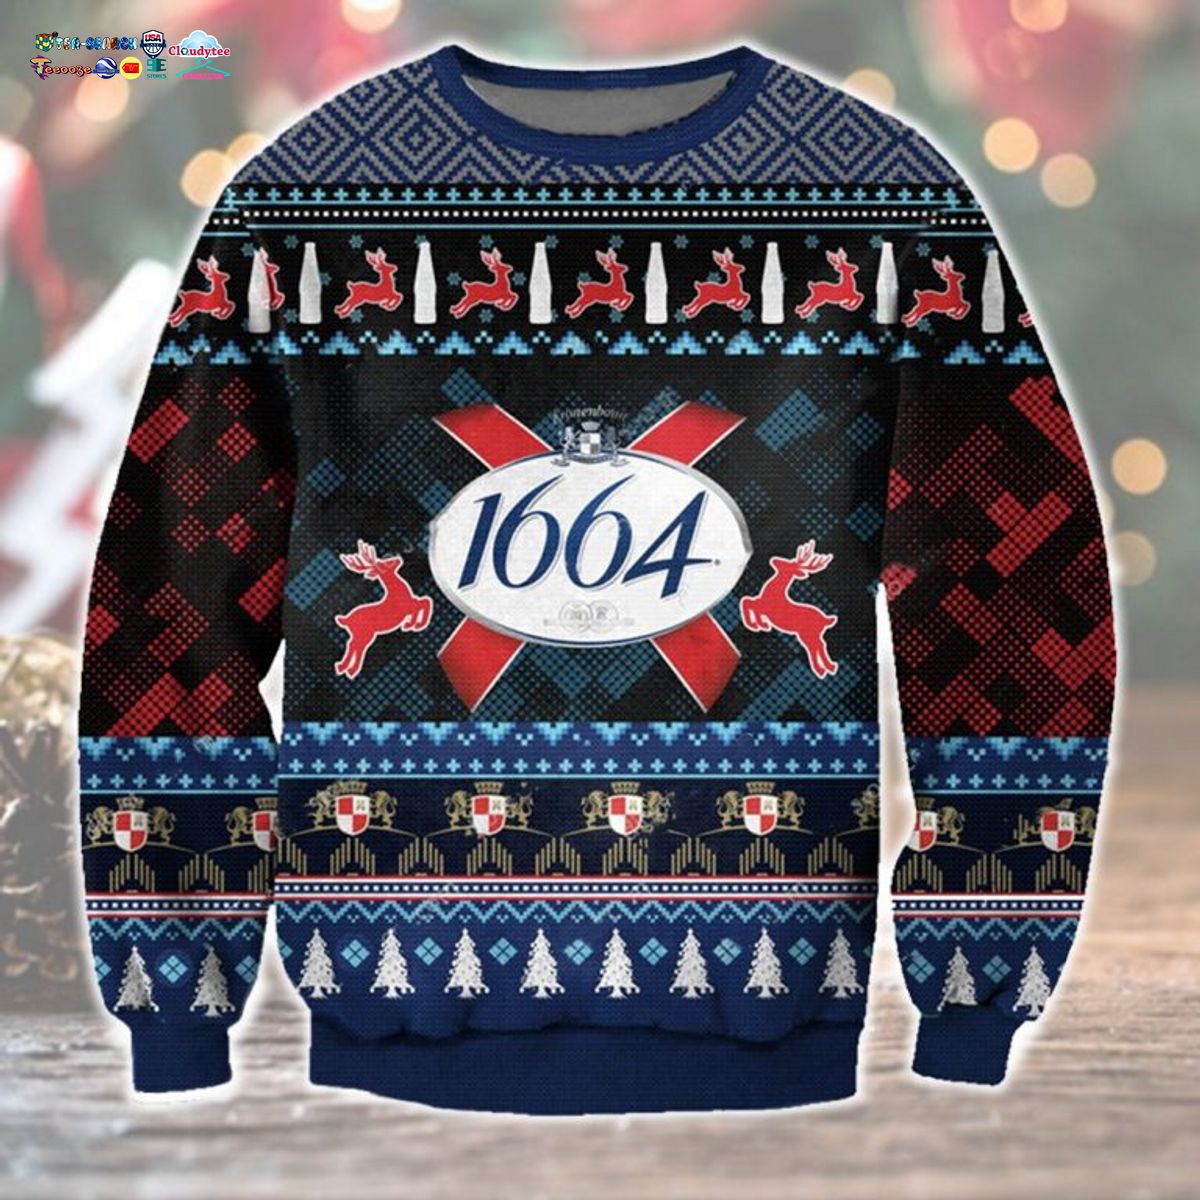 Kronenbourg 1664 Ugly Christmas Sweater